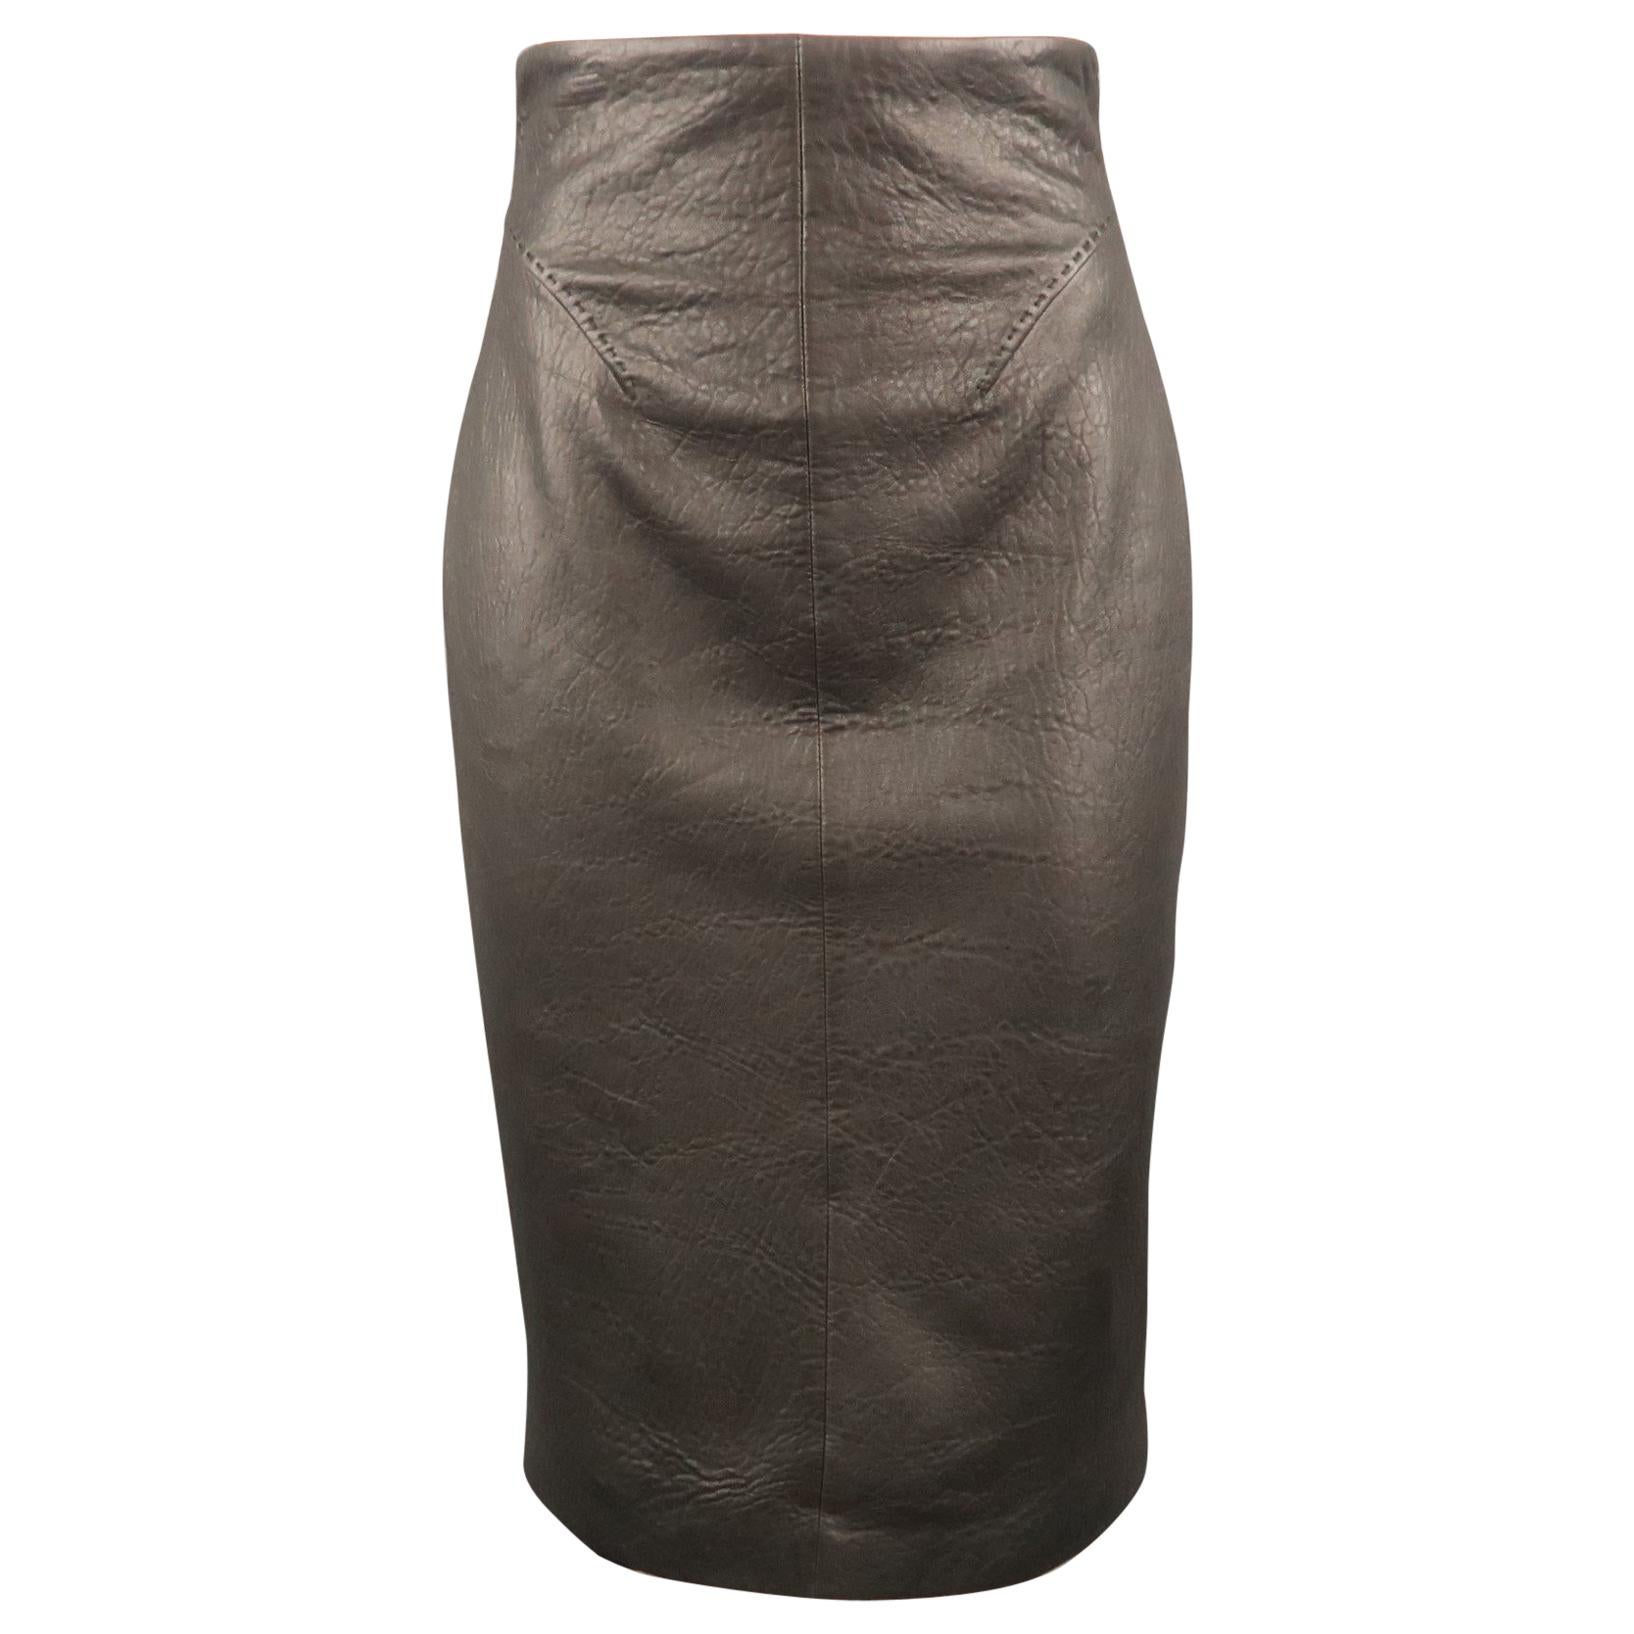 GIANFRANCO FERRE Size 4 Black Textured Leather Belted Cutout Back Pencil Skirt